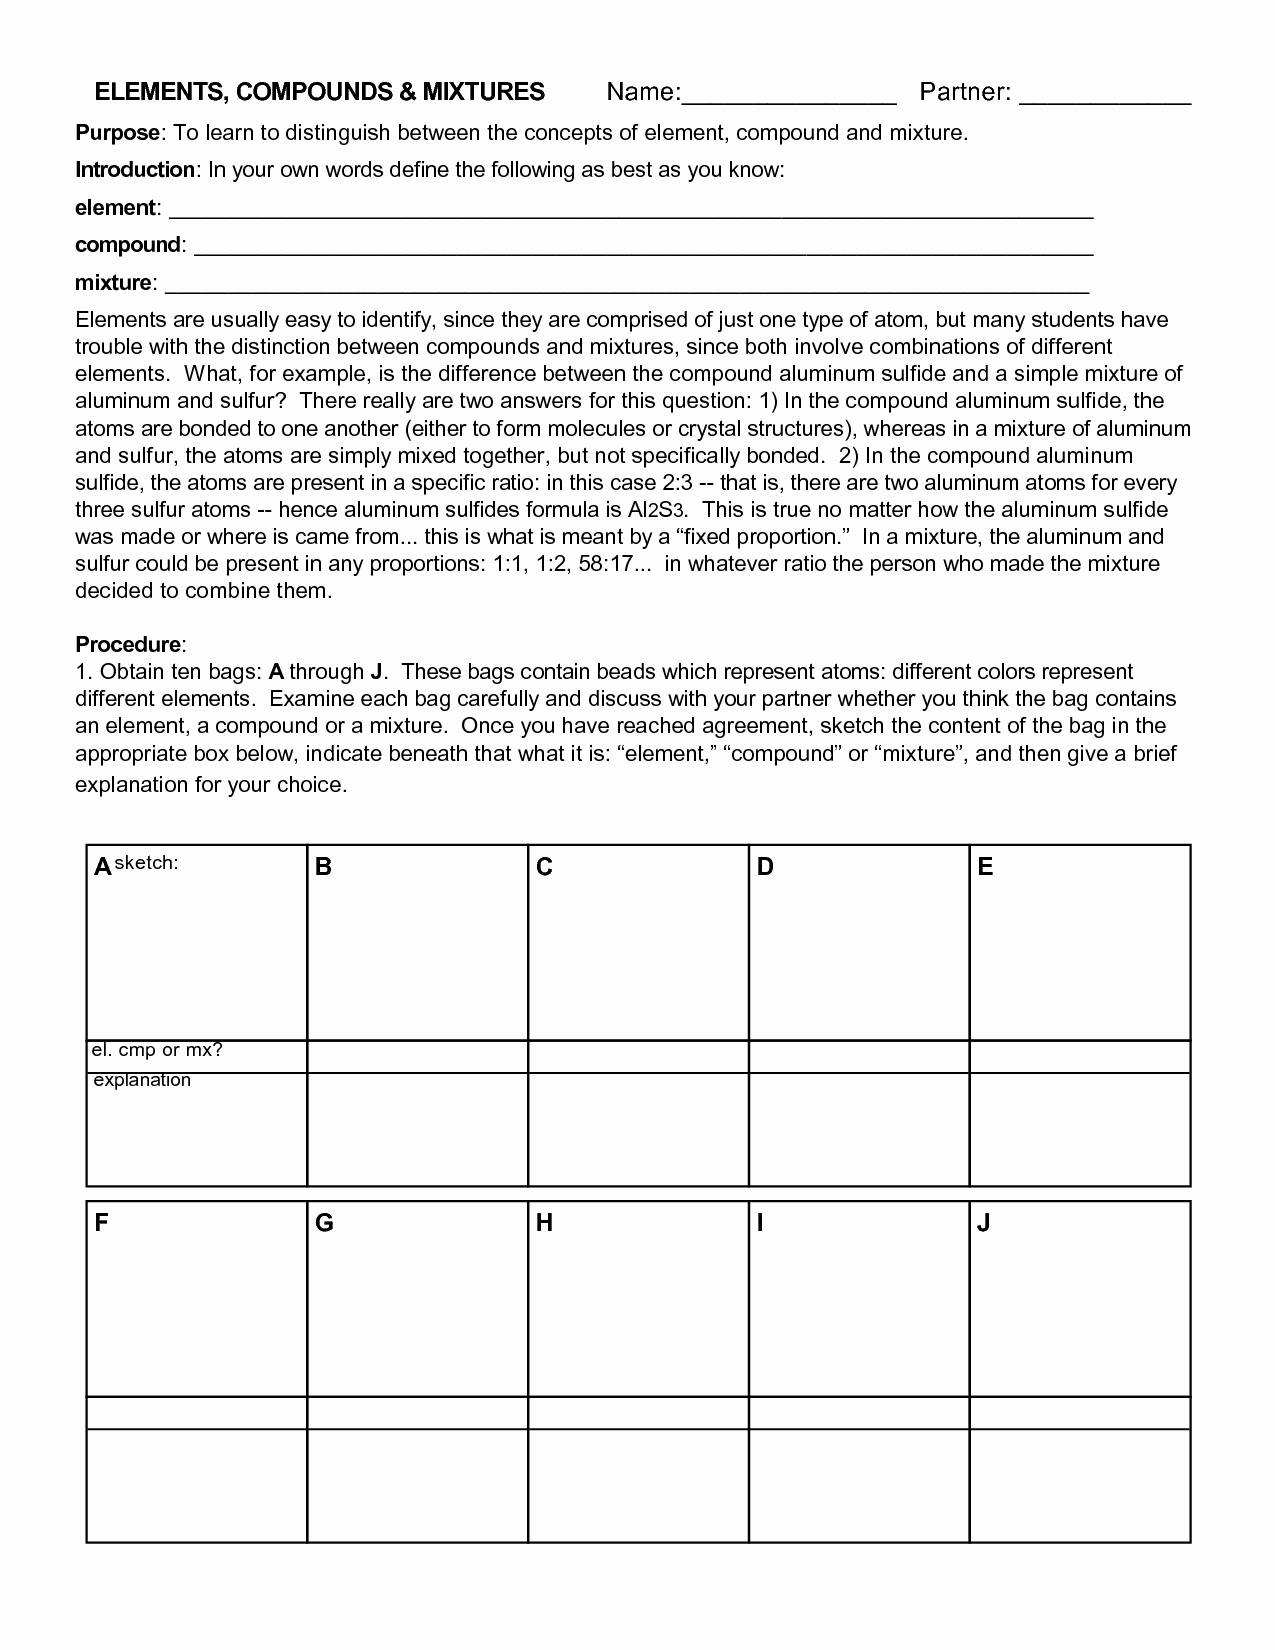 Element Compound Mixture Worksheet Fresh Elements Pounds and Mixtures Coloring Worksheet